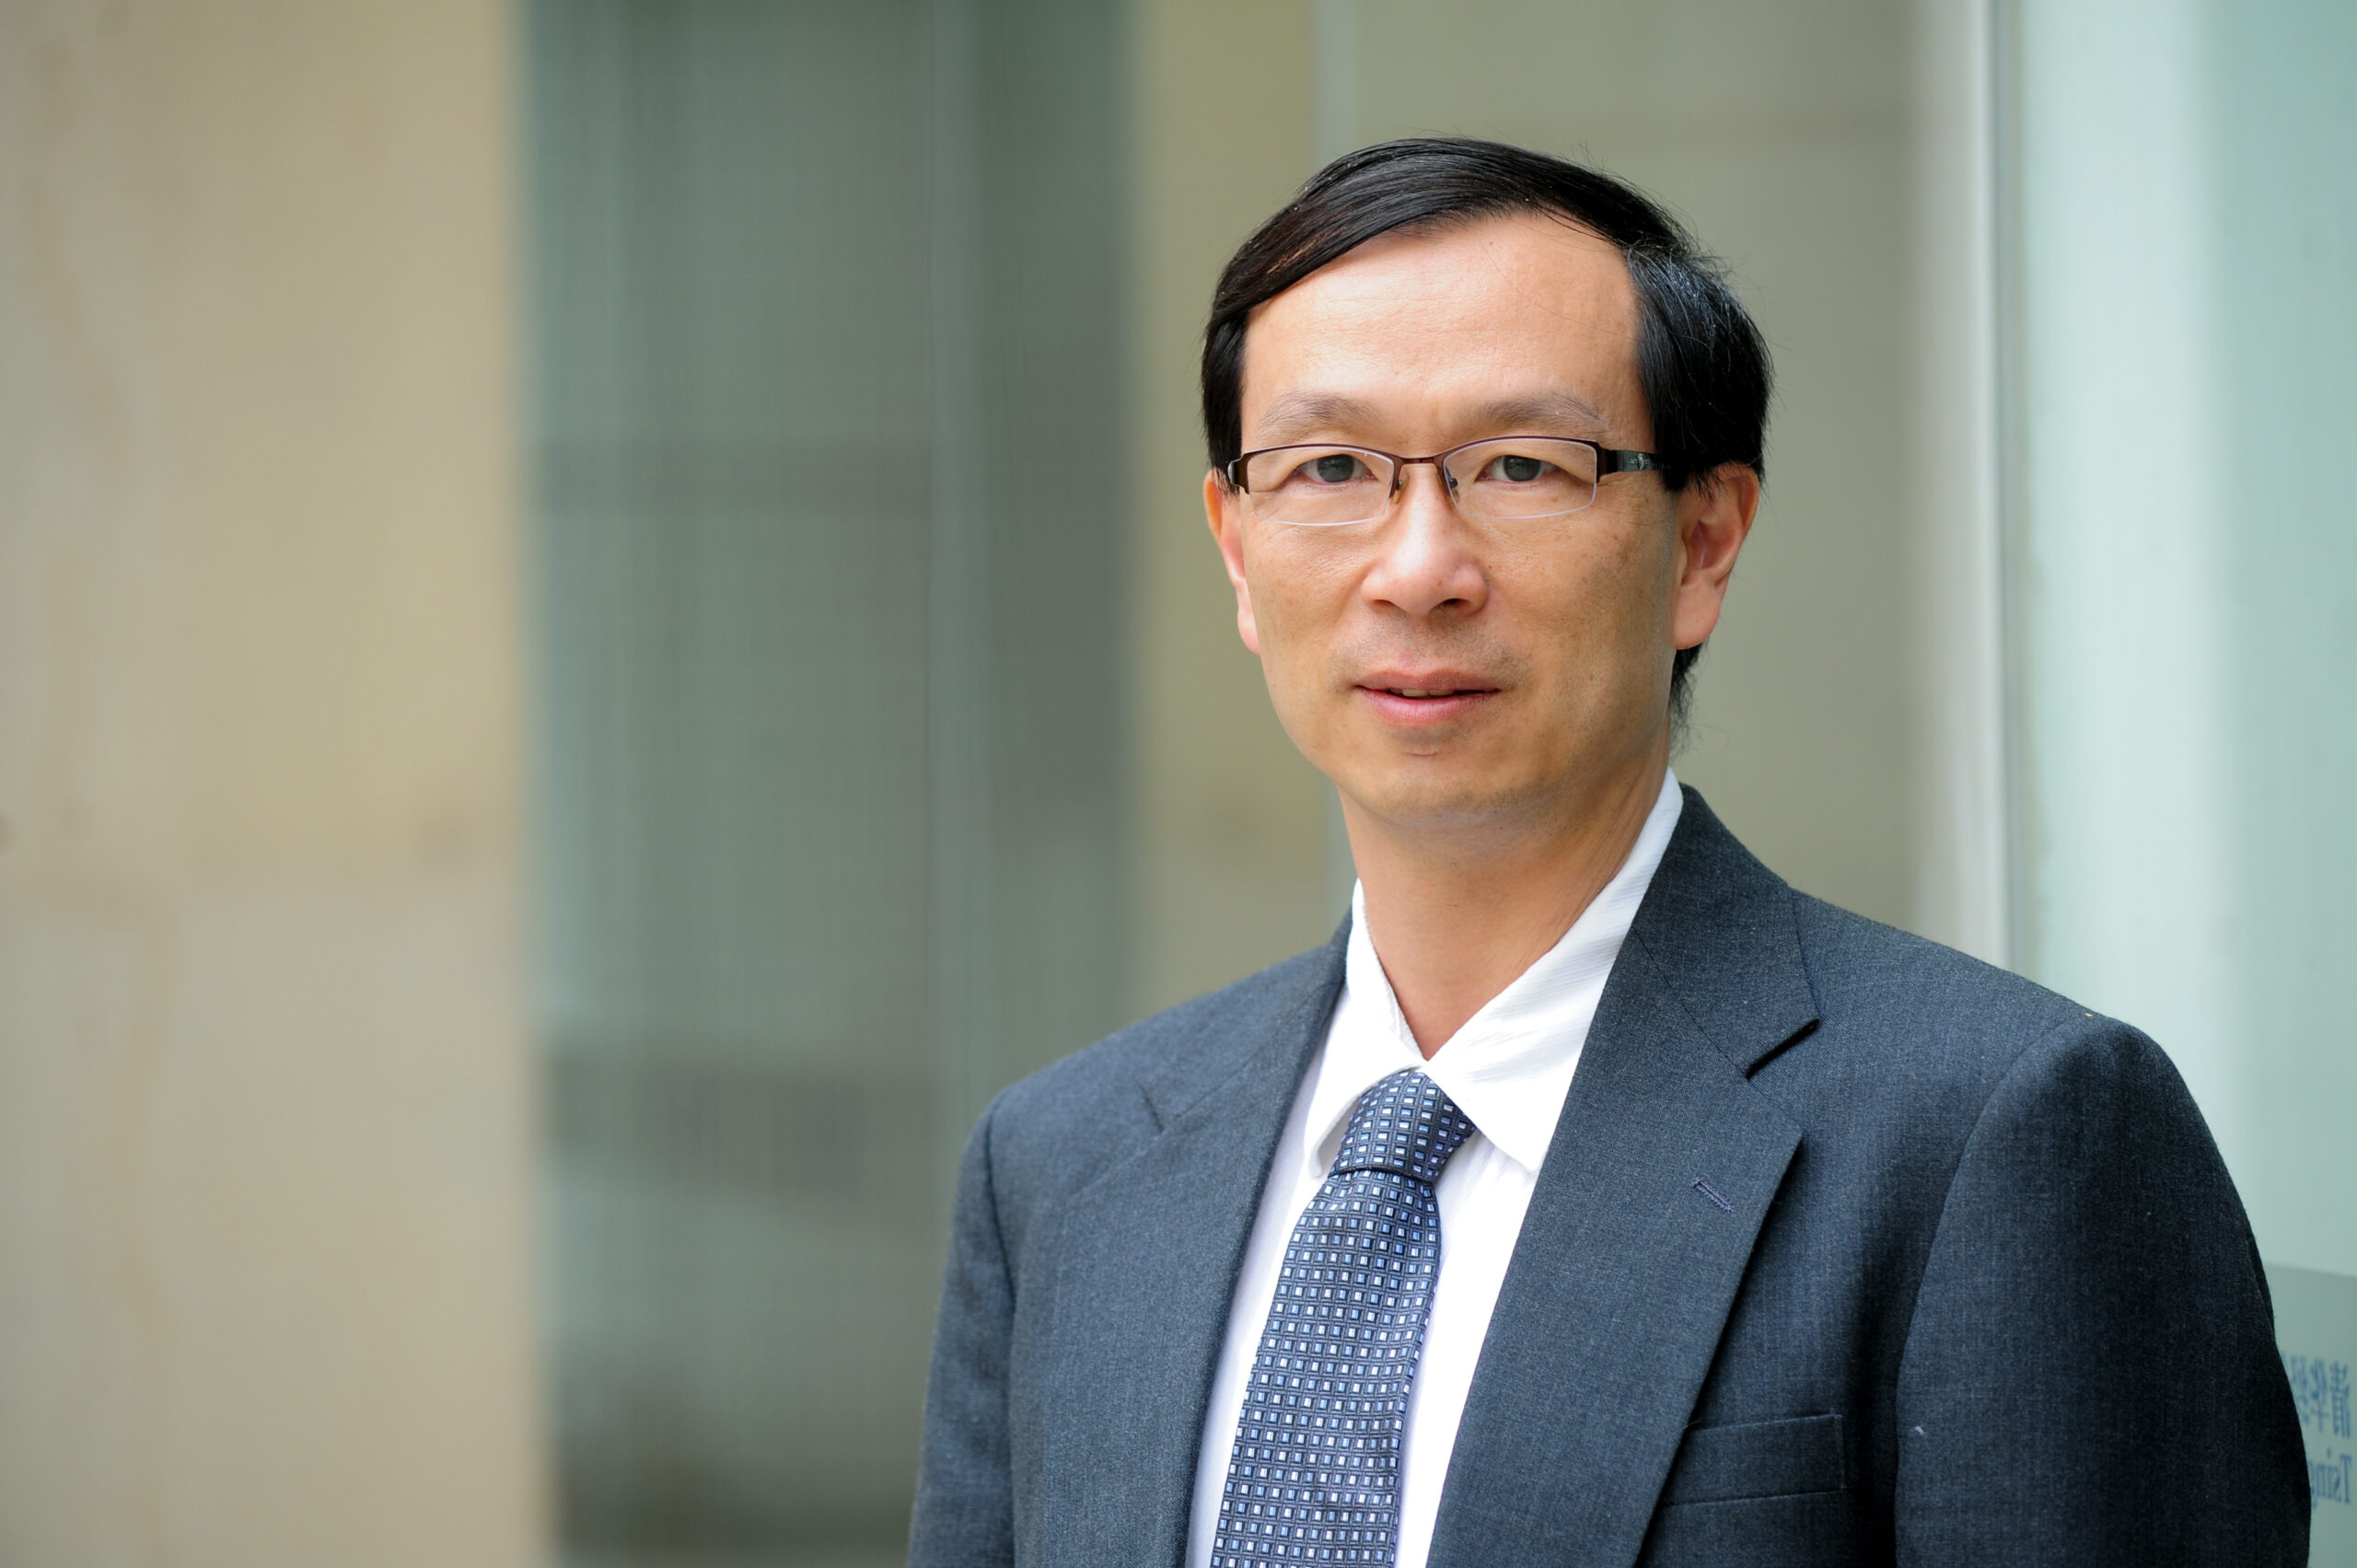 Professor Lijian Yang was Elected as Distinguished Fellow of the International Engineering and Technology Institute